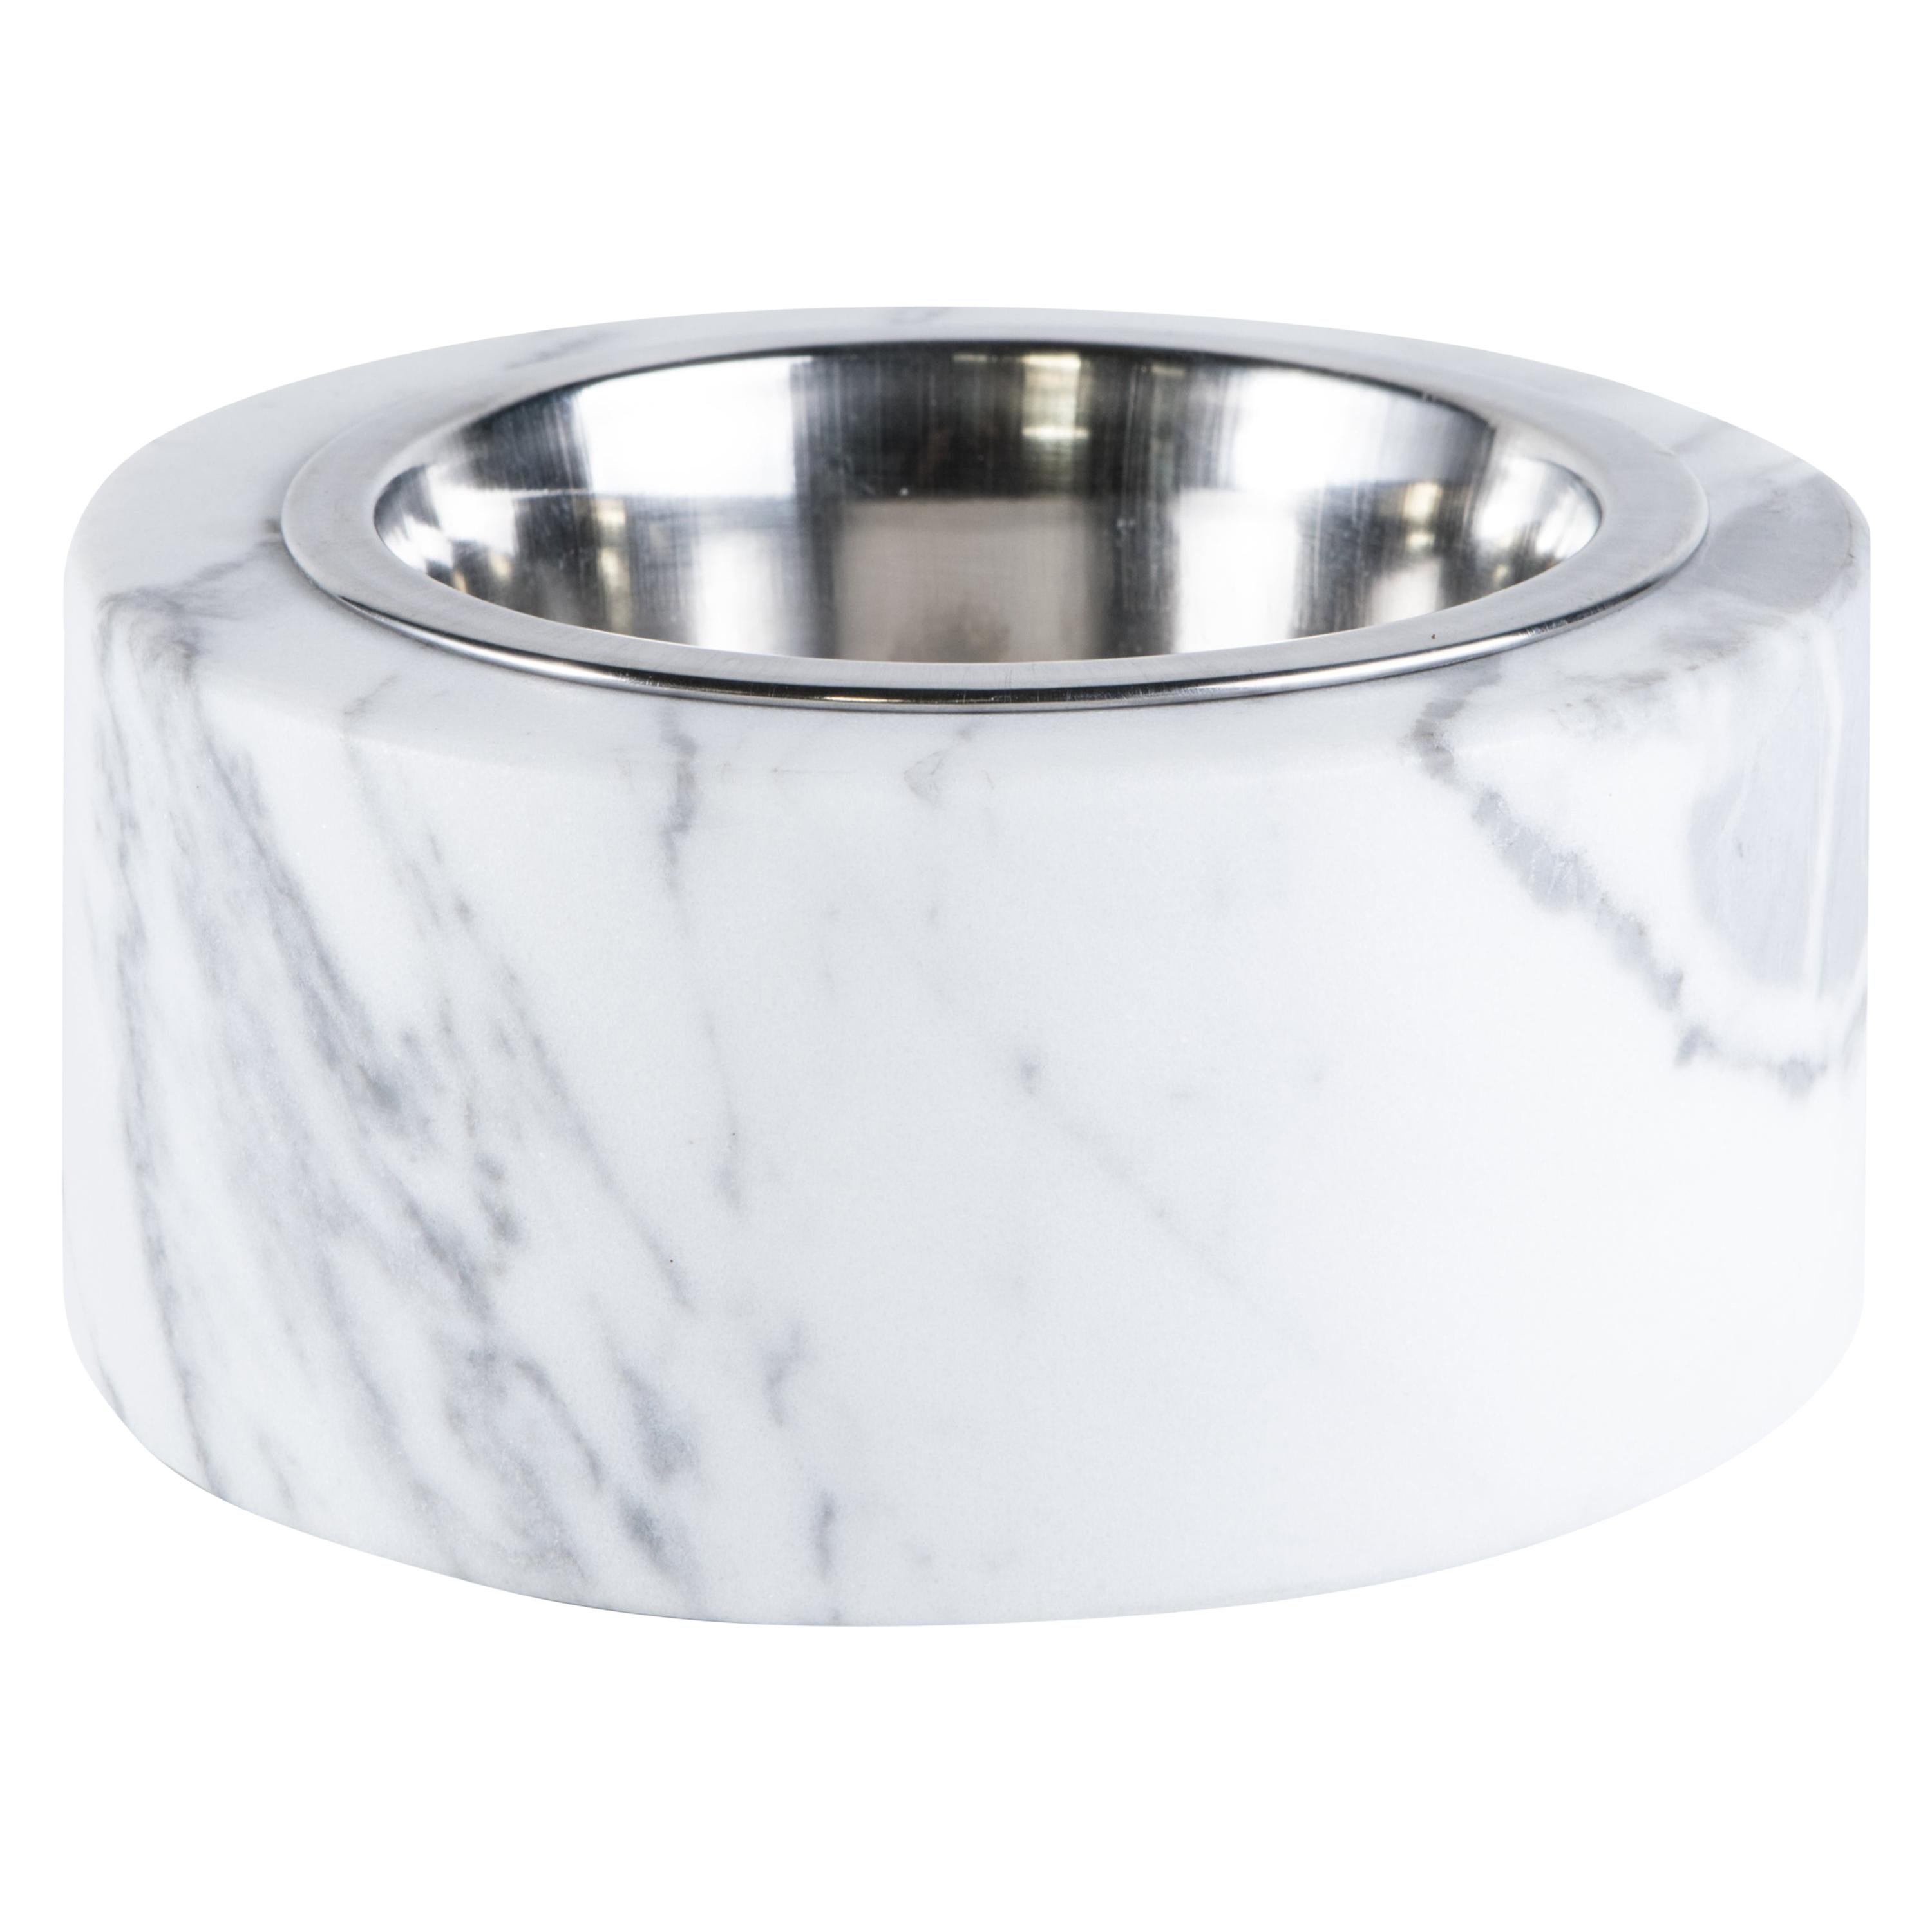 Handmade Rounded White Carrara Marble Cats or Dogs Bowl with Removable Steel